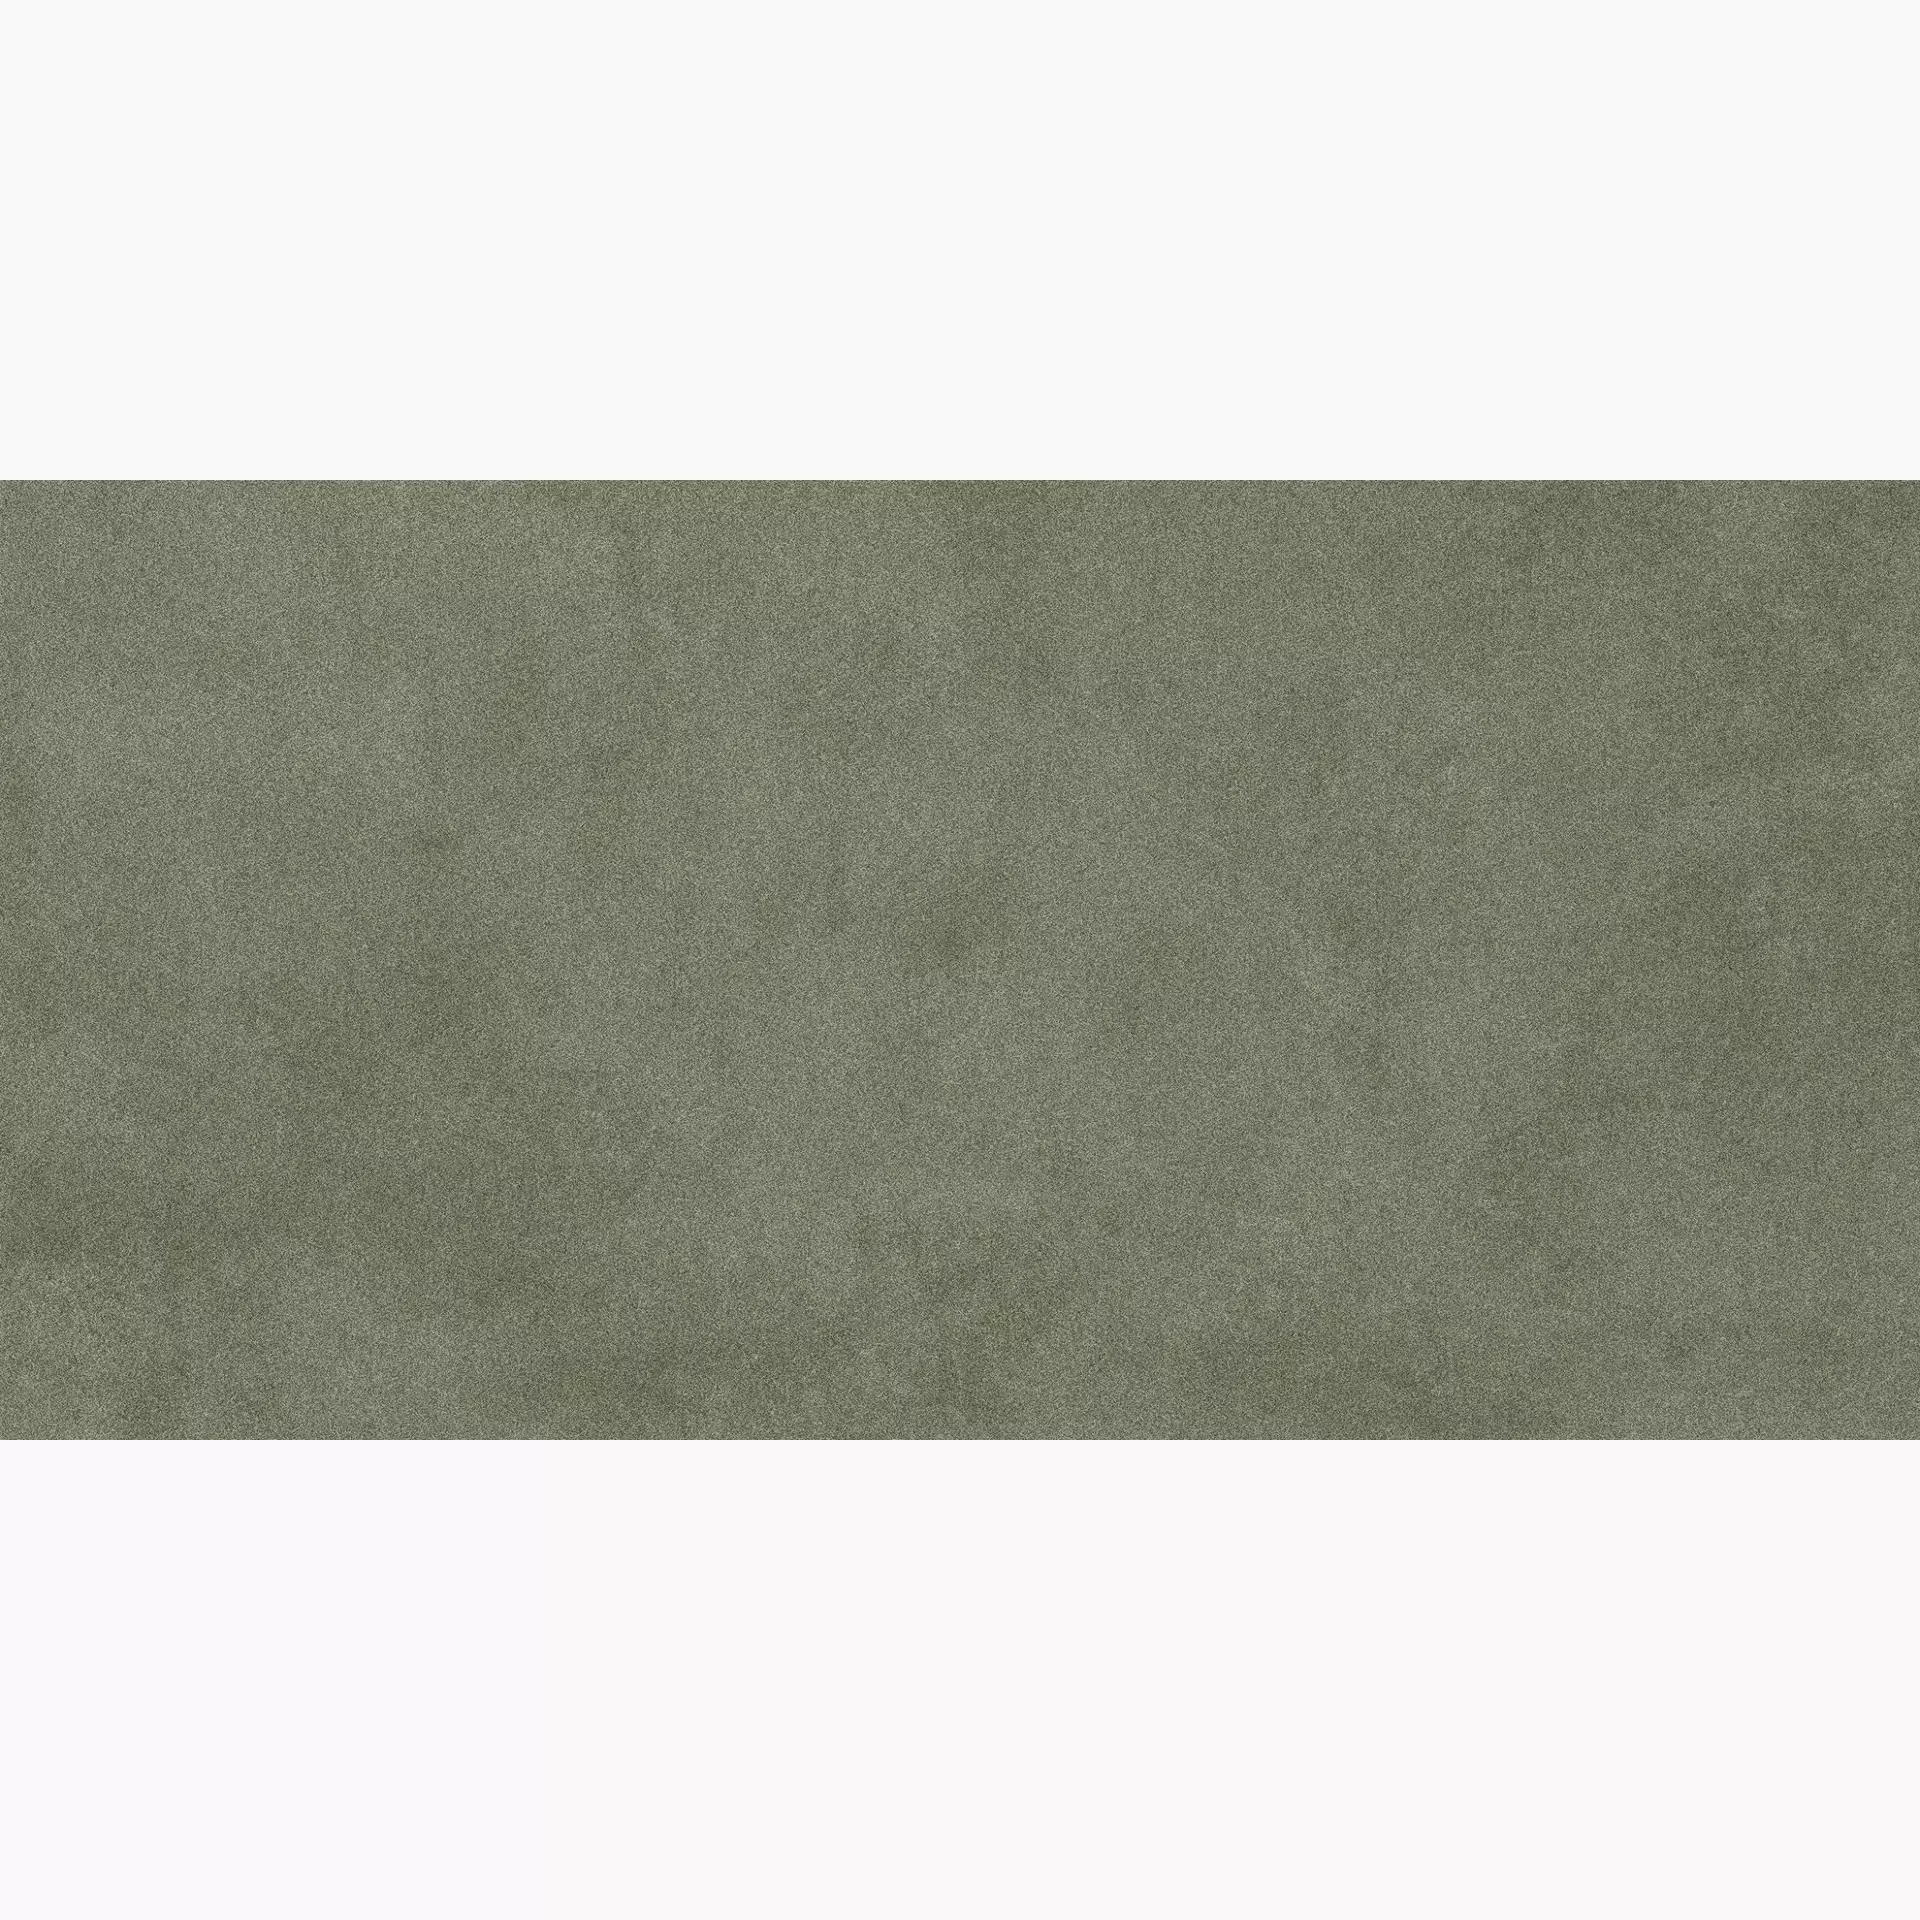 Atlasconcorde Boost Pro Taupe Outdoor Taupe A4XW outdoor 60x120cm rektifiziert 20mm